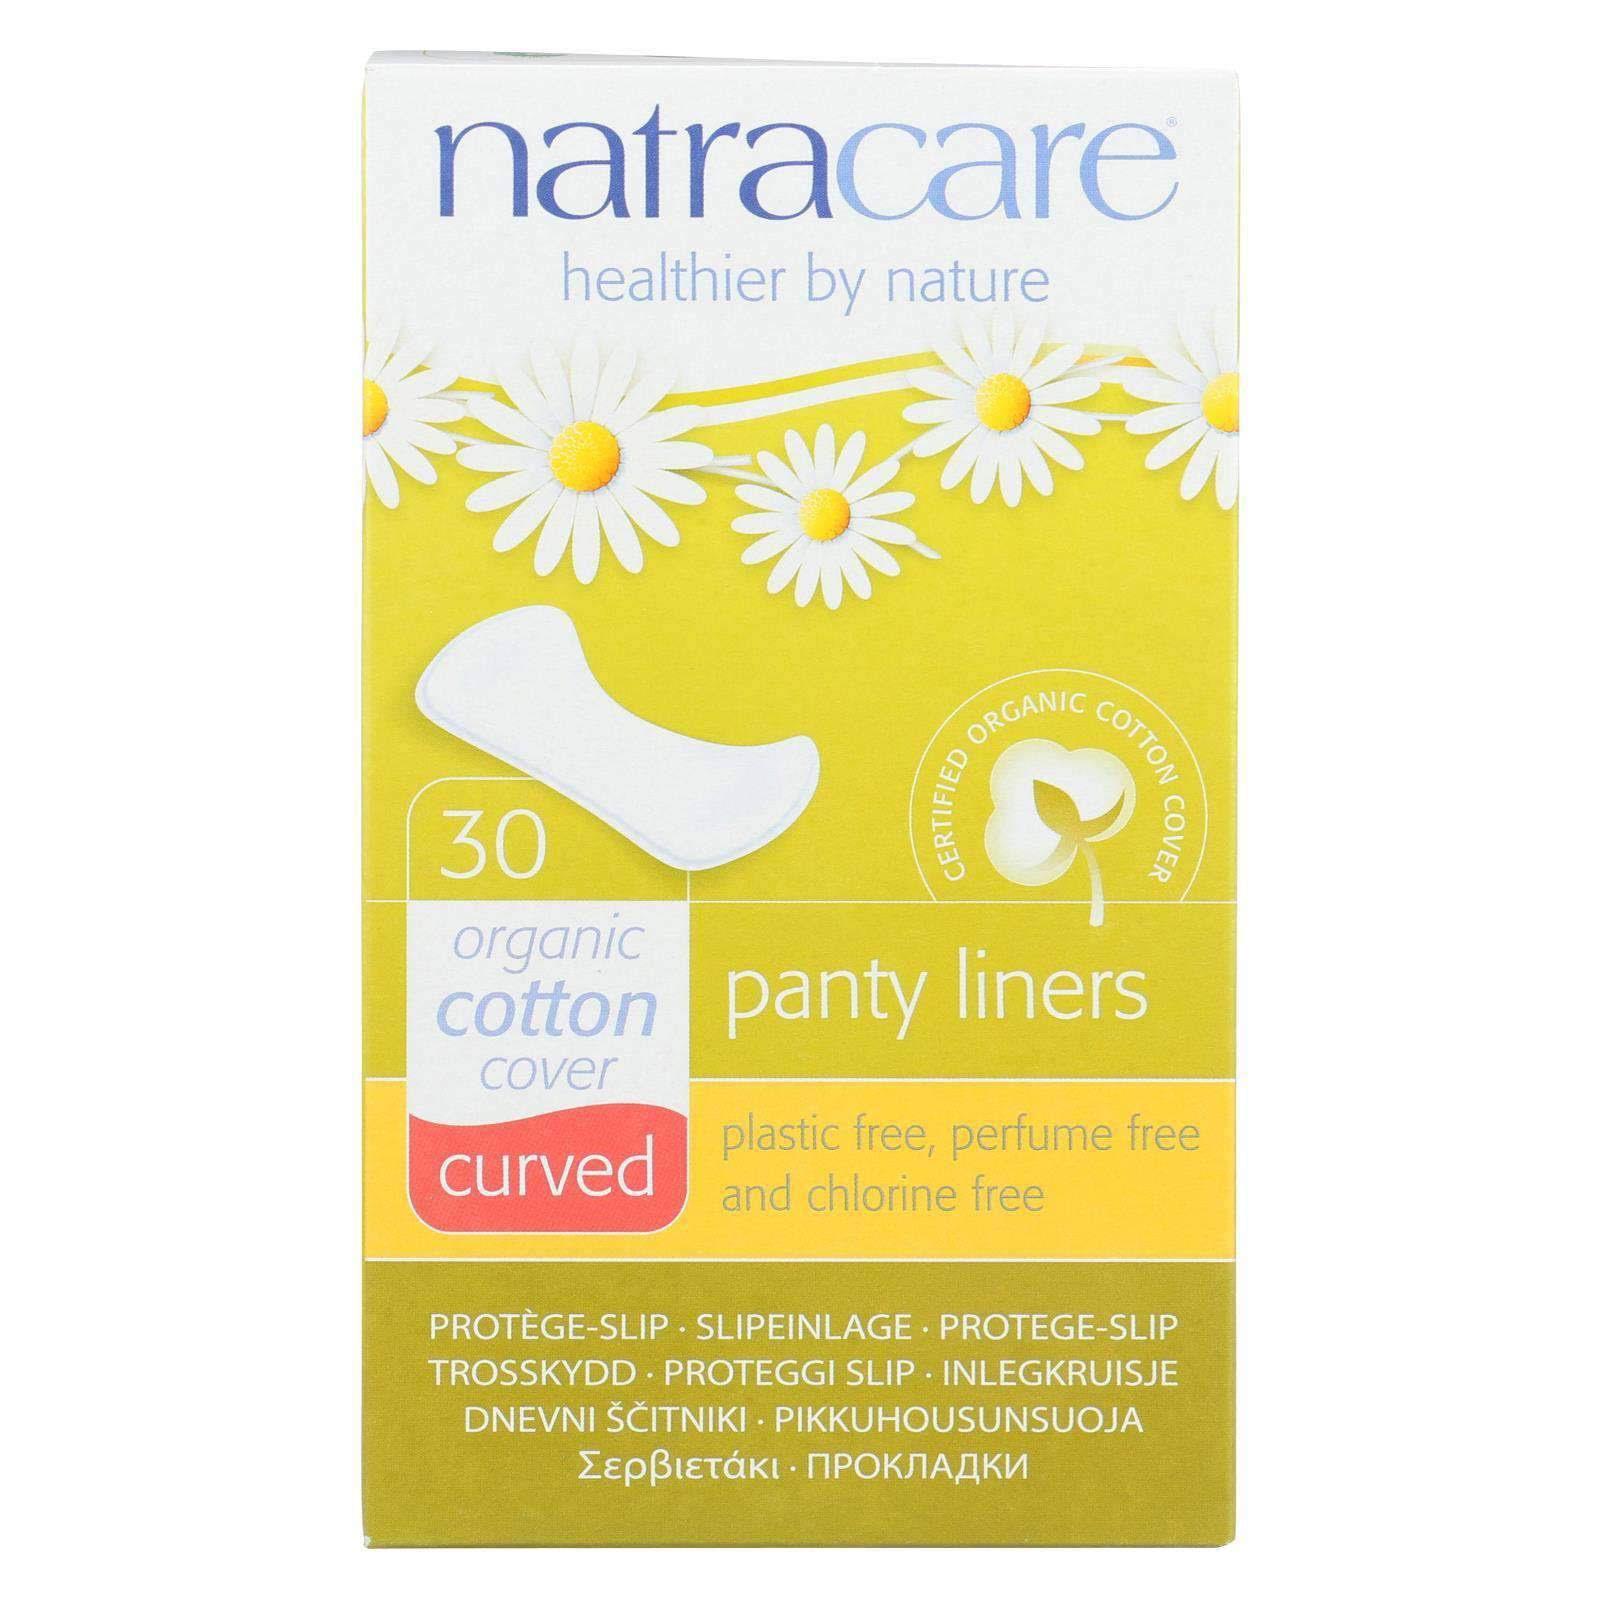 Natracare Curved Organic Cotton Pantyliners - 30 Pantyliners